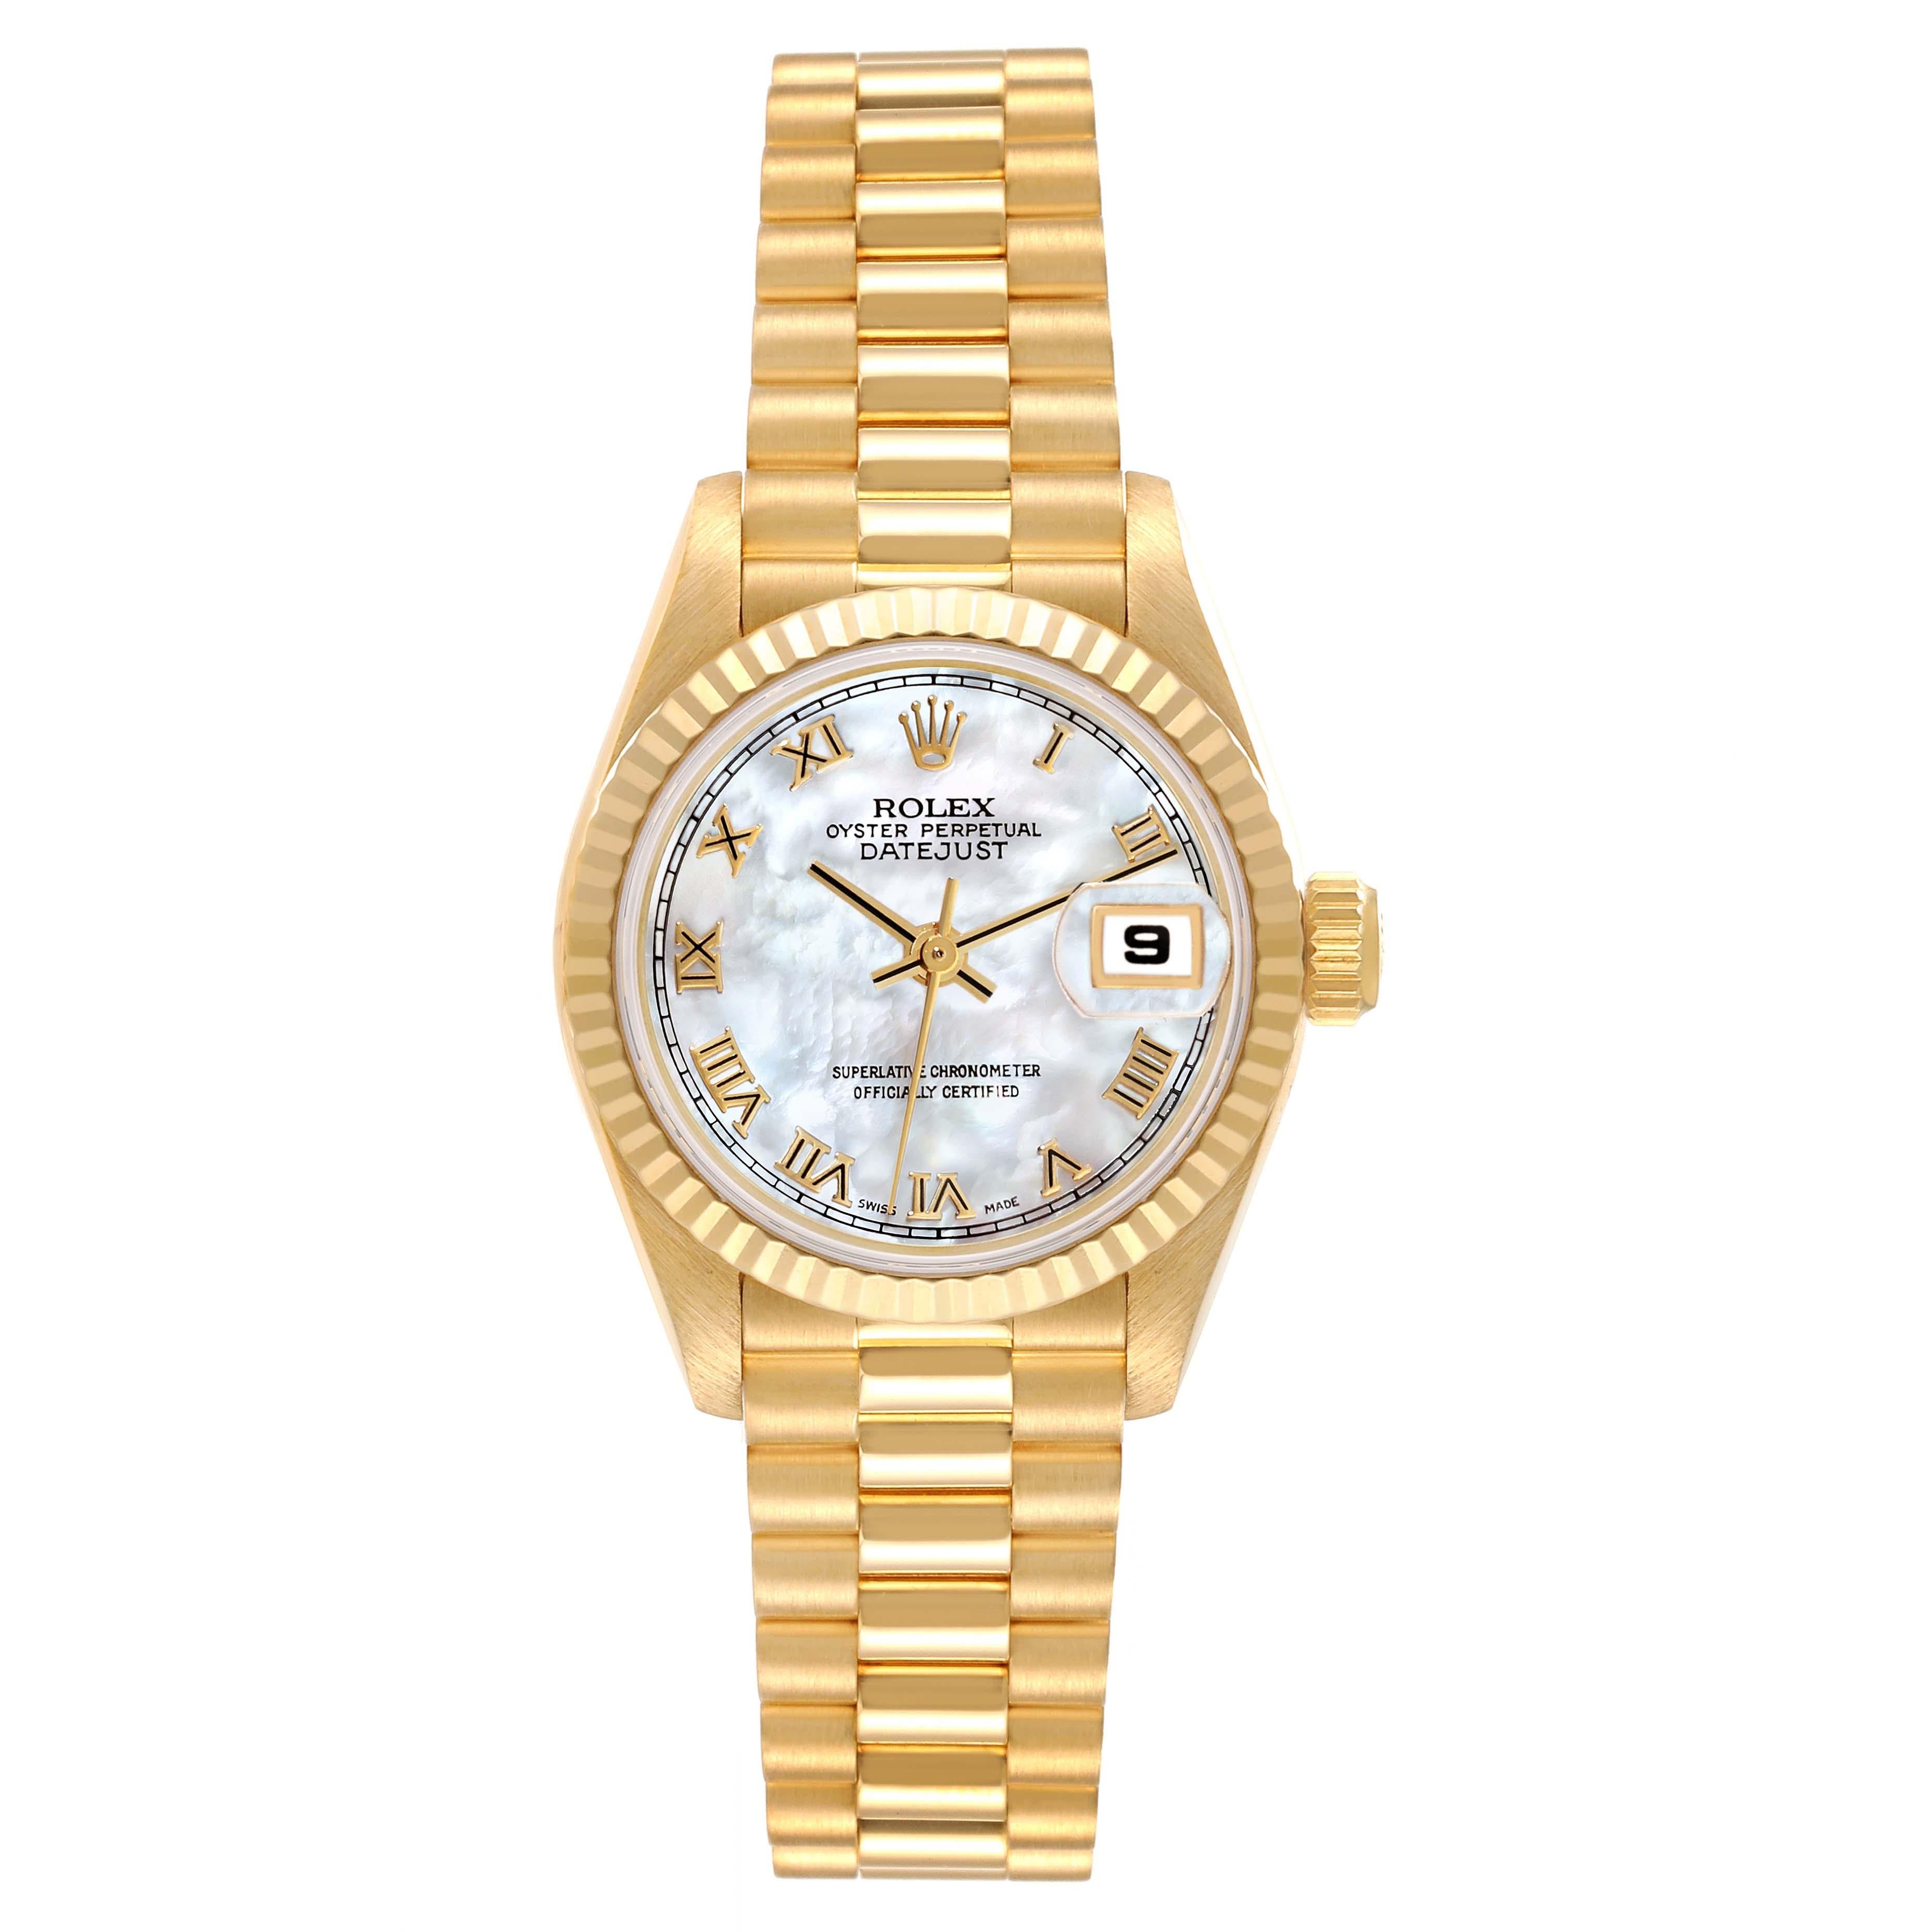 Rolex Datejust President Mother Of Pearl Dial Yellow Gold Ladies Watch 69178. Officially certified chronometer automatic self-winding movement. 18k yellow gold oyster case 26.0 mm in diameter. Rolex logo on the crown. 18k yellow gold fluted bezel.